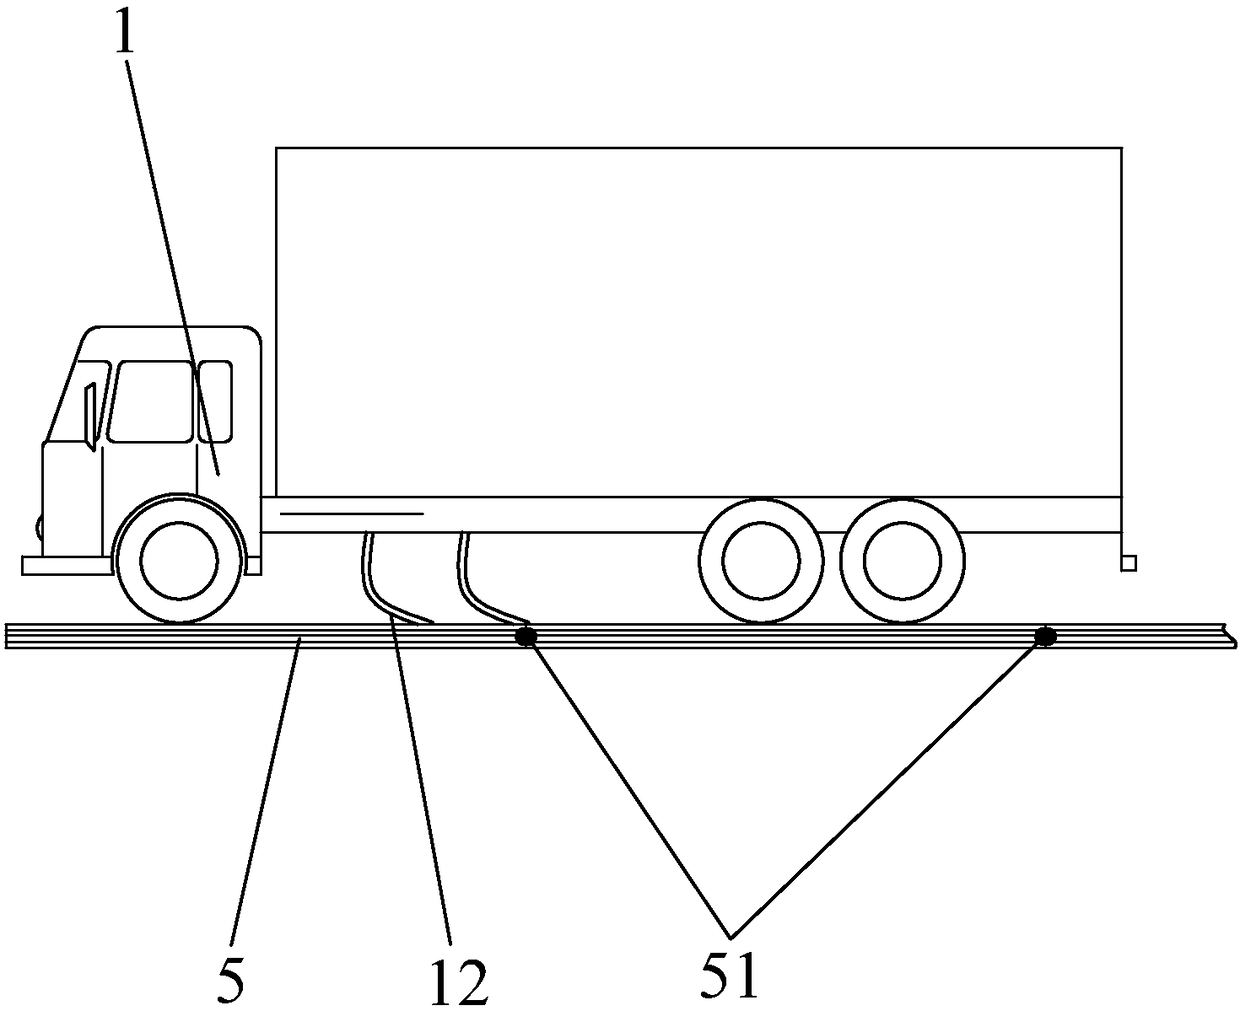 Semi-automatic wharf high-speed heavy-duty track and wharf loading and unloading system layout